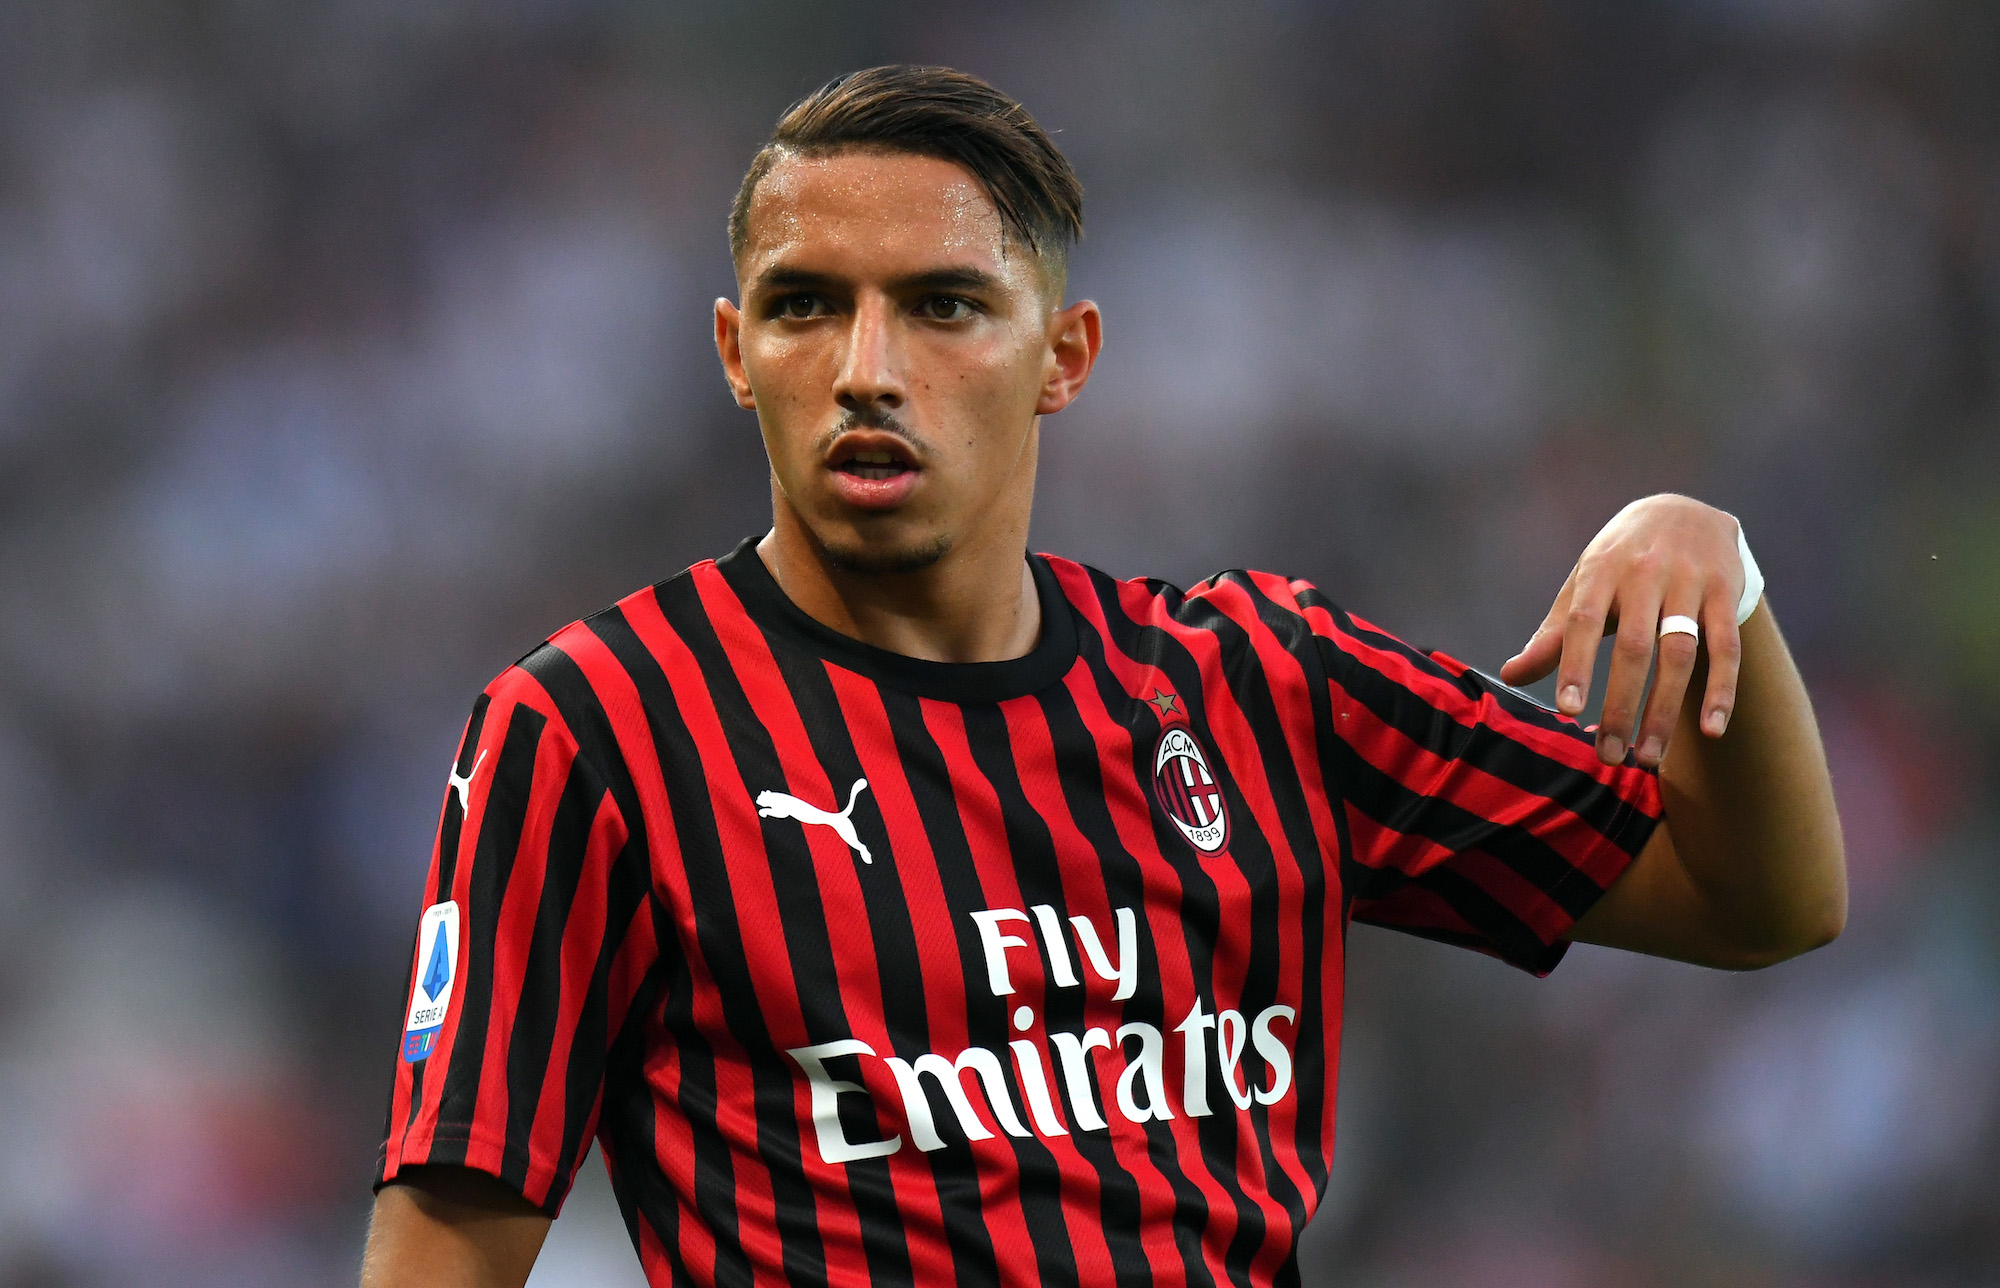 Ismael Bennacer's release clause revealed - AC Milan News